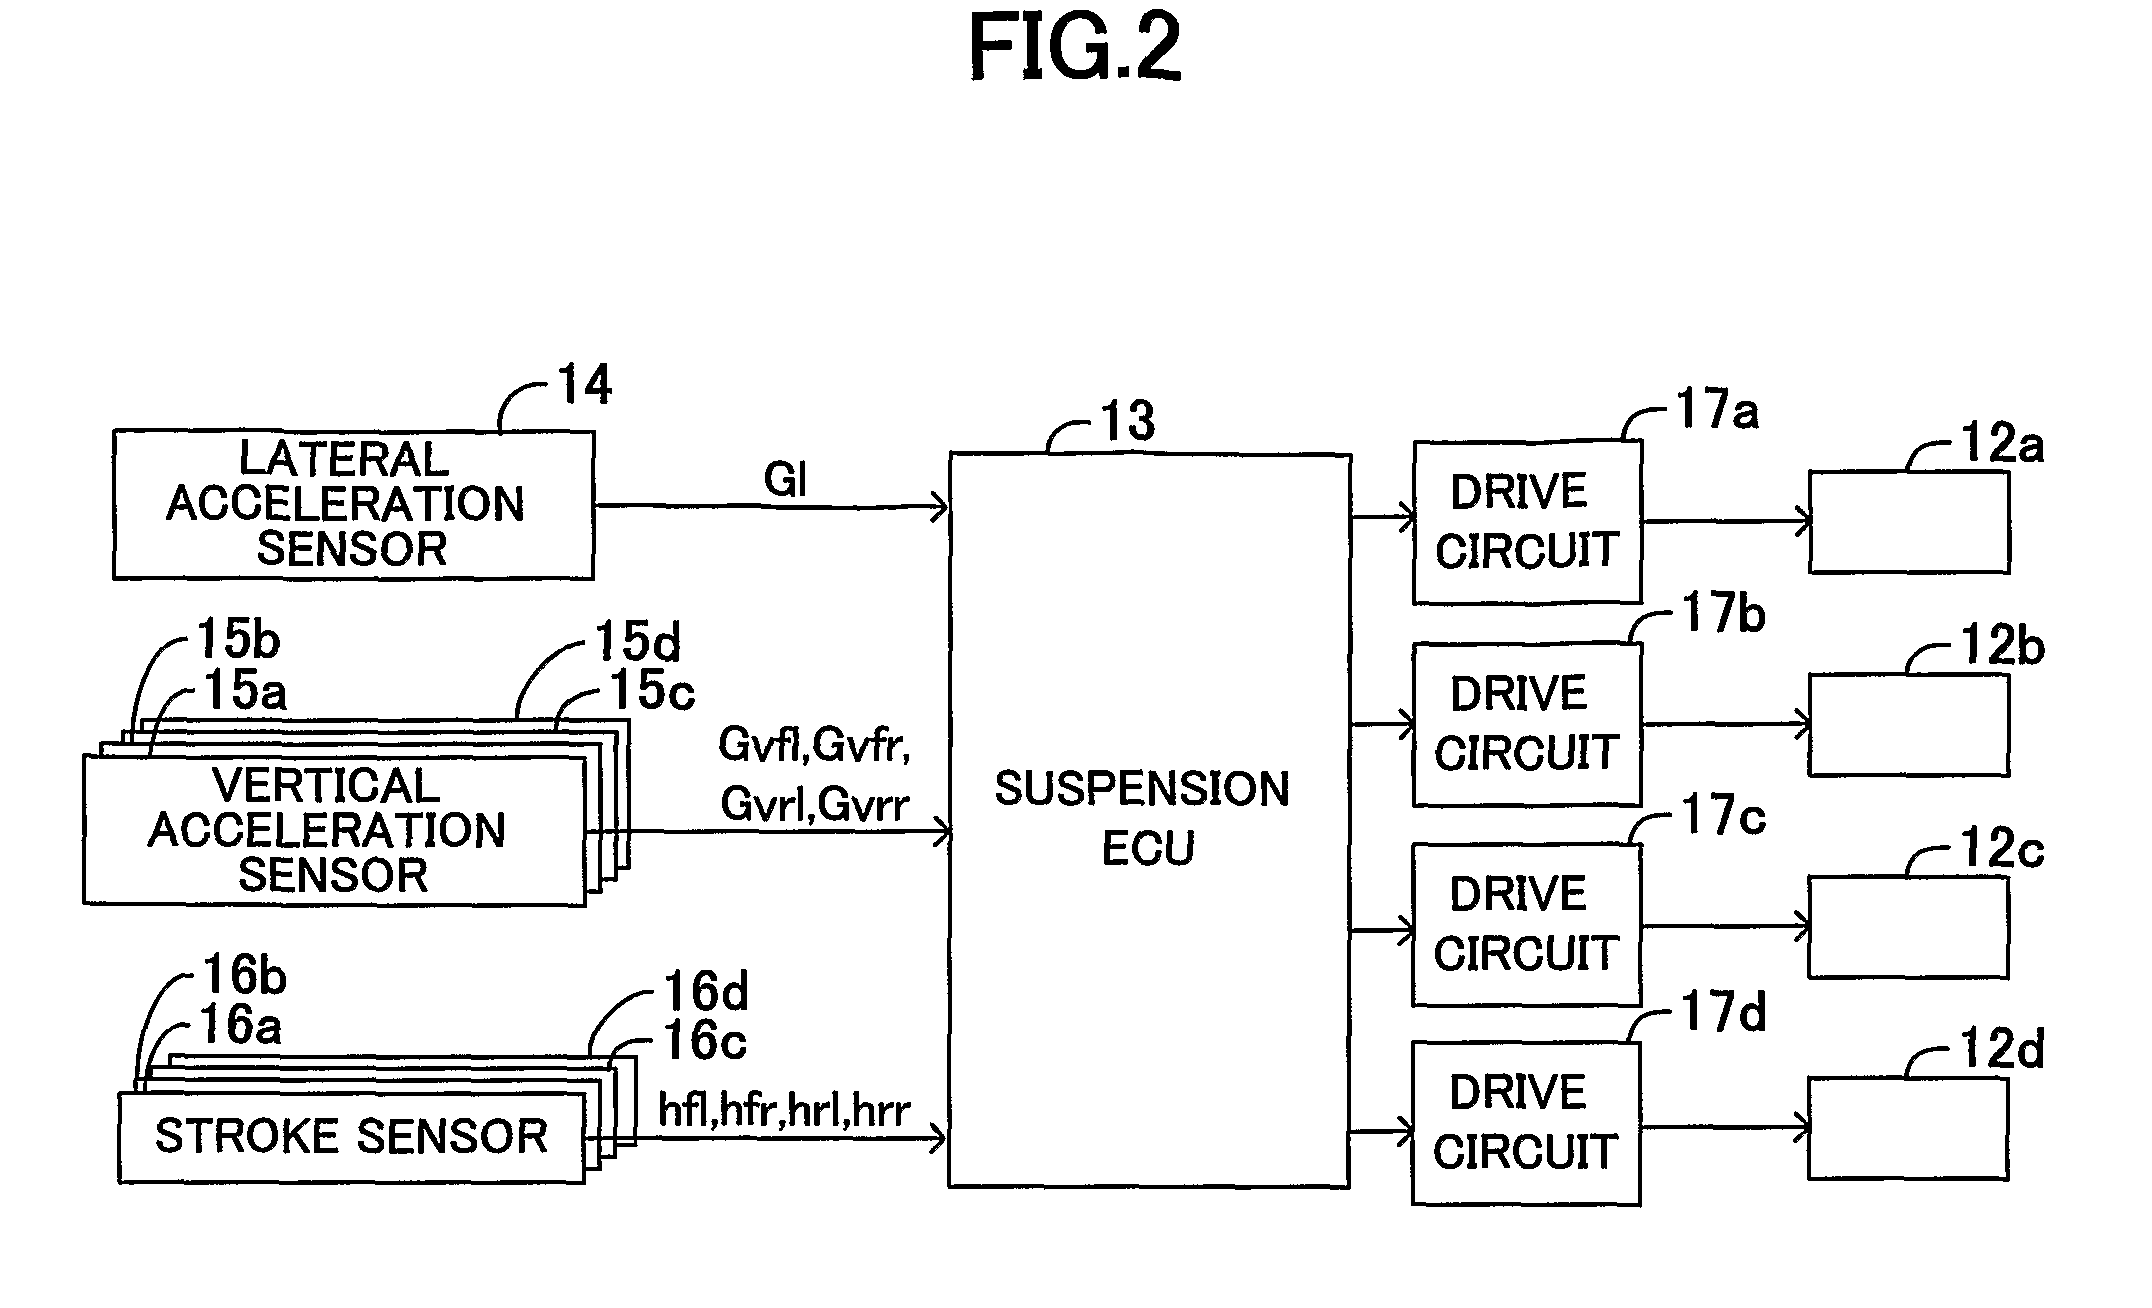 Damping force control apparatus for vehicle